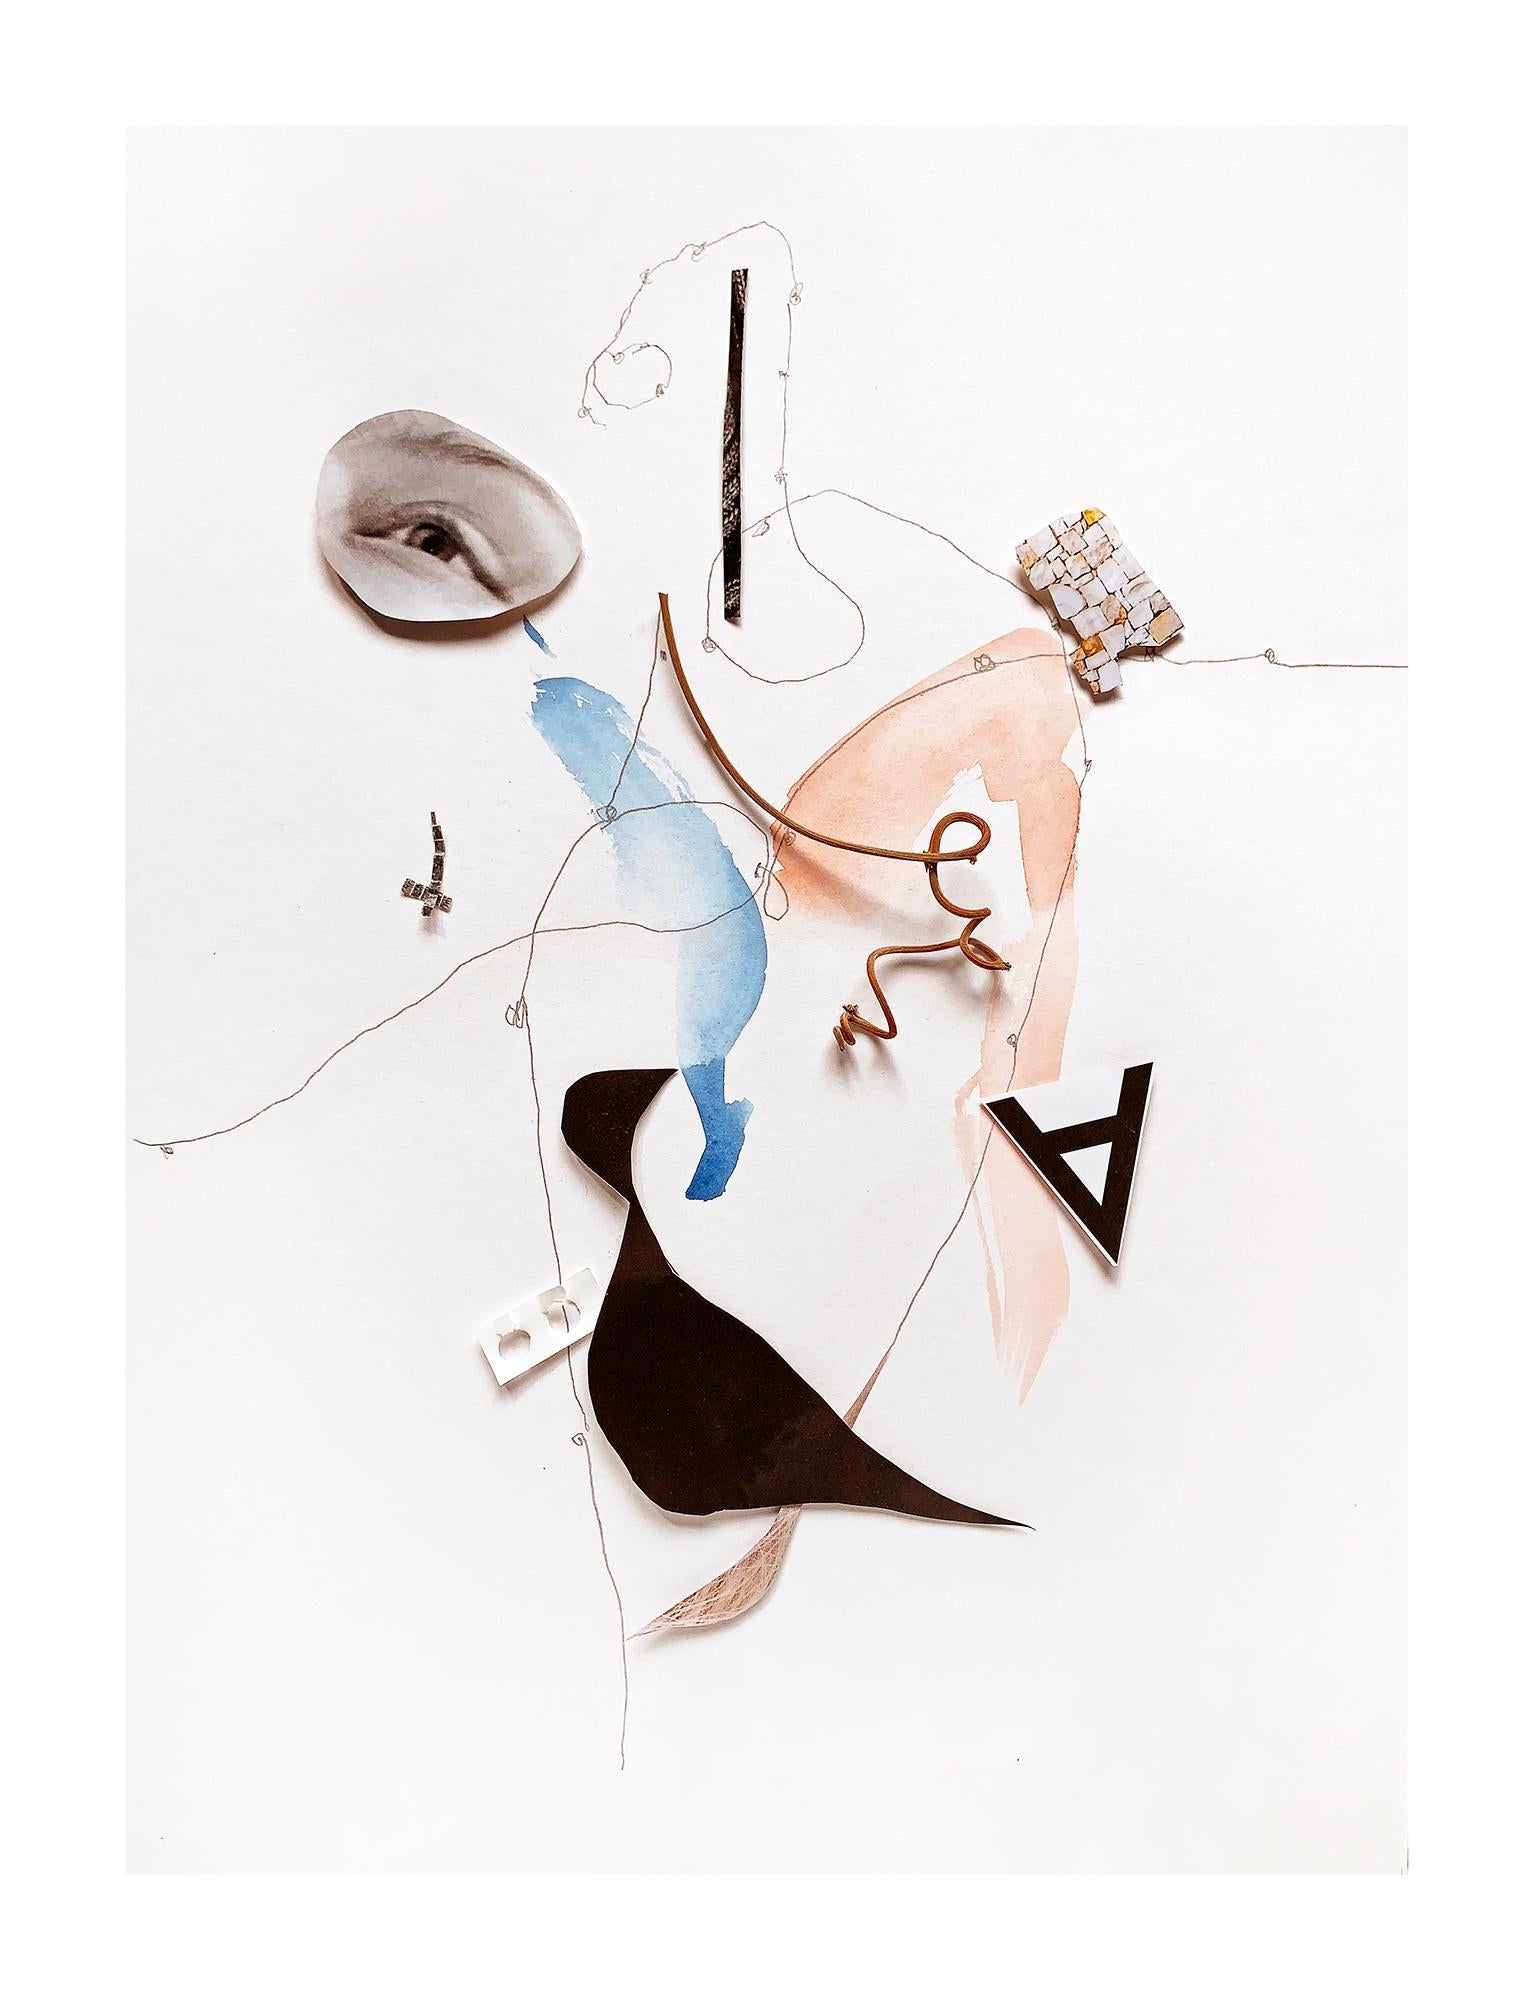 Corso_NC 22 No. 3b

Limited Edition Archival Pigment Print of Collage Still Life
40